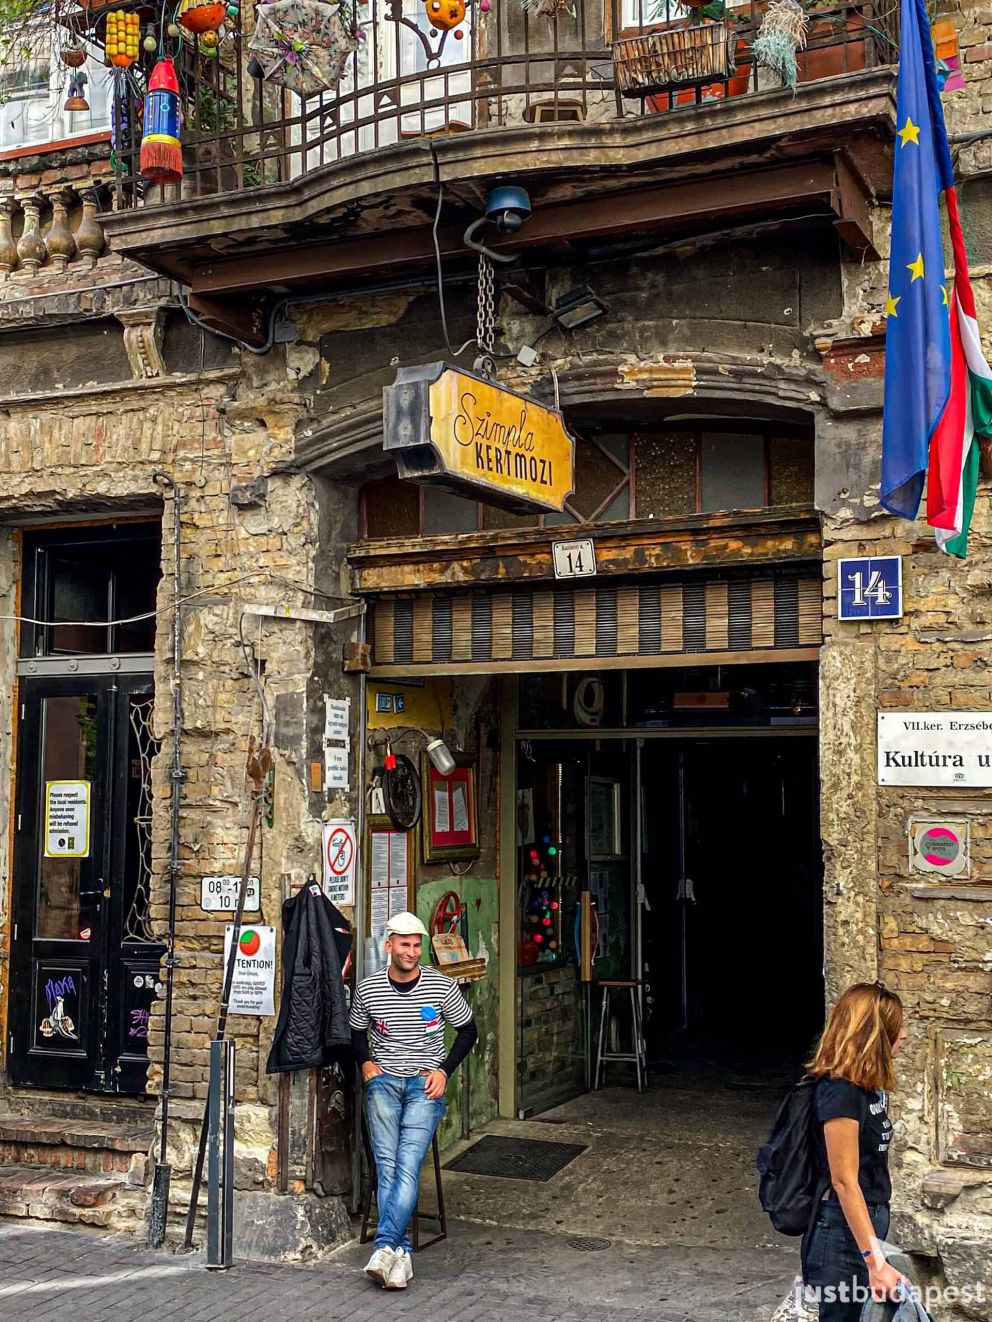 The entrance of Szimpla Kert ruin pub in Budapest